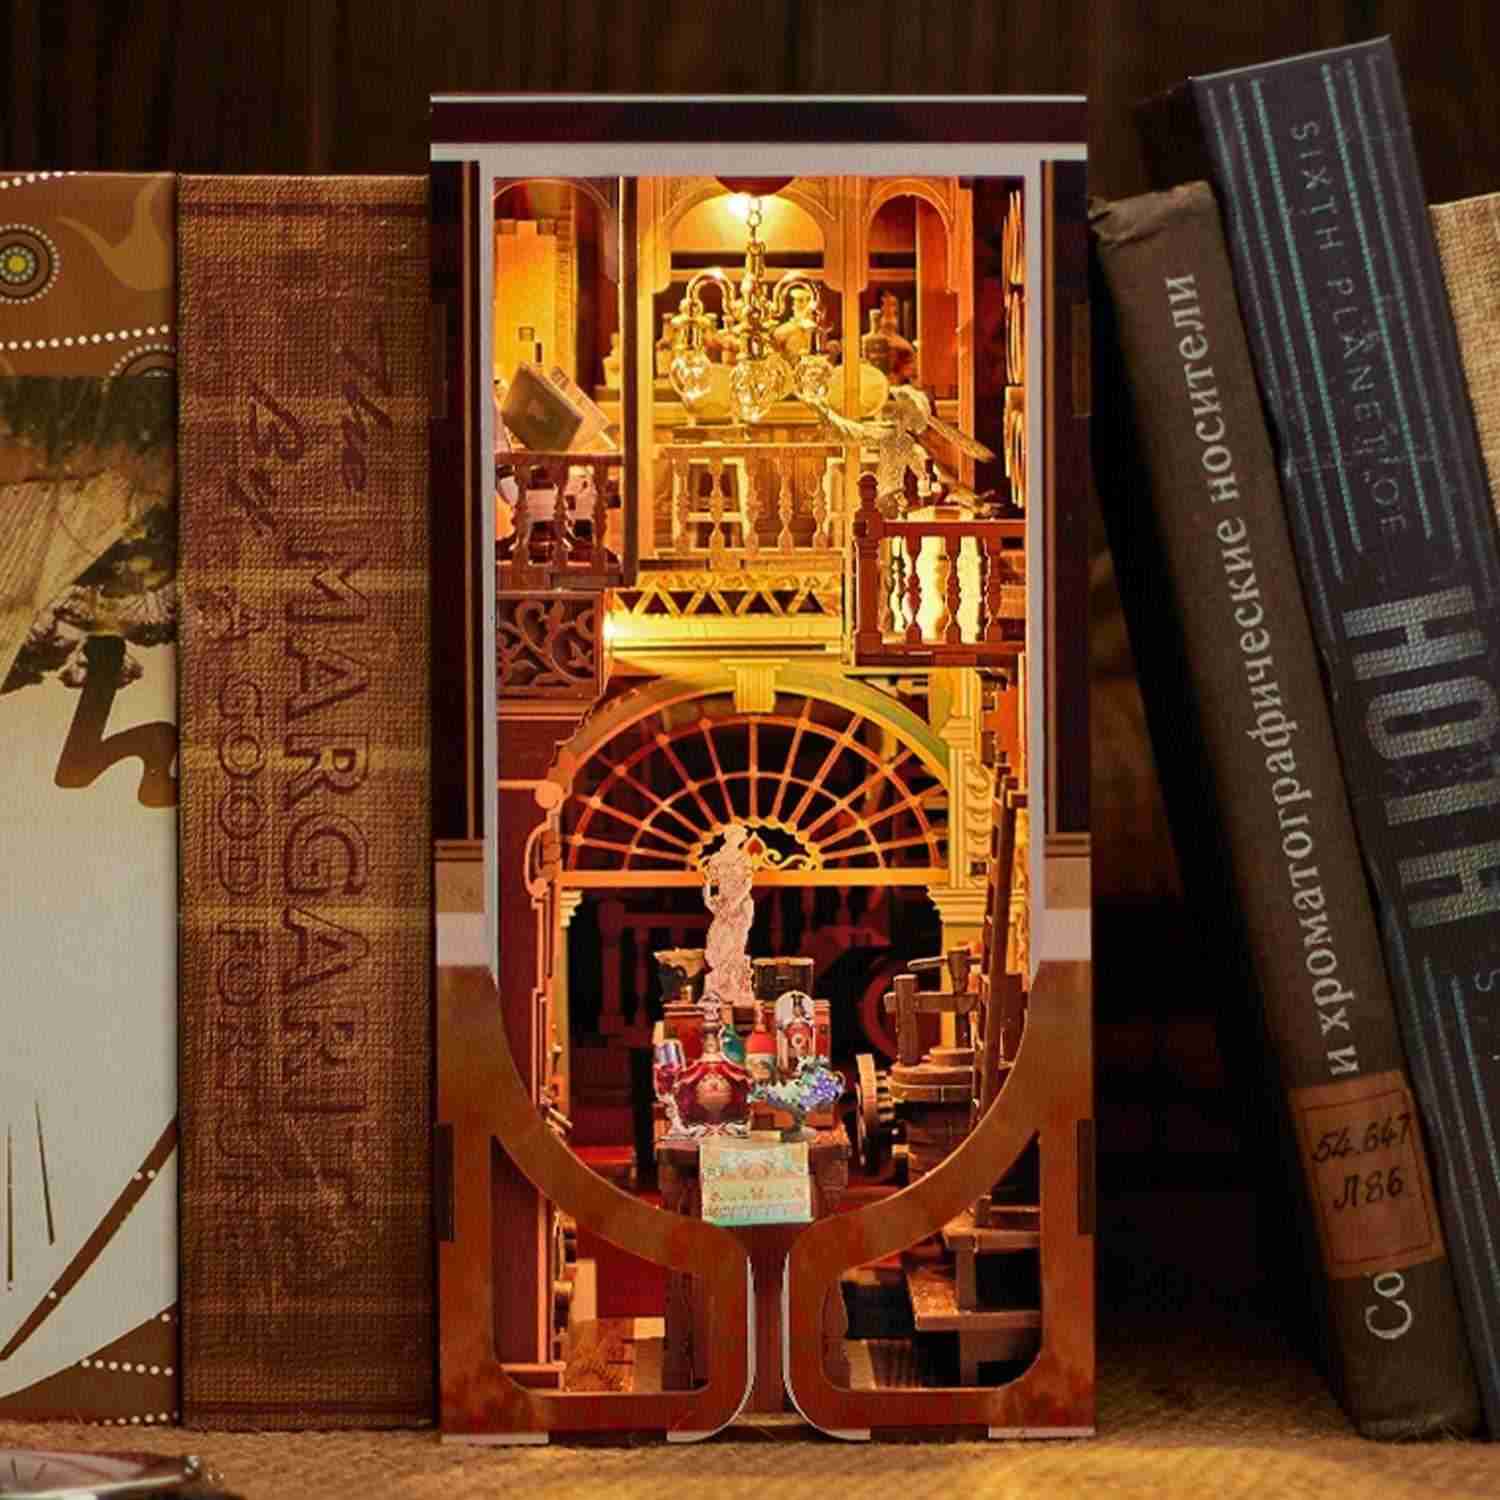 Louis Tavern DIY Book Nook Kit, A charming miniature 3d wooden puzzles  inspired Roaring Twenties of jazz, flappers, and speakeasies, perfect for bookshelf decor, and dollhouse collectors, or a gift a fan of the roaring twenties or just love creating miniature worlds